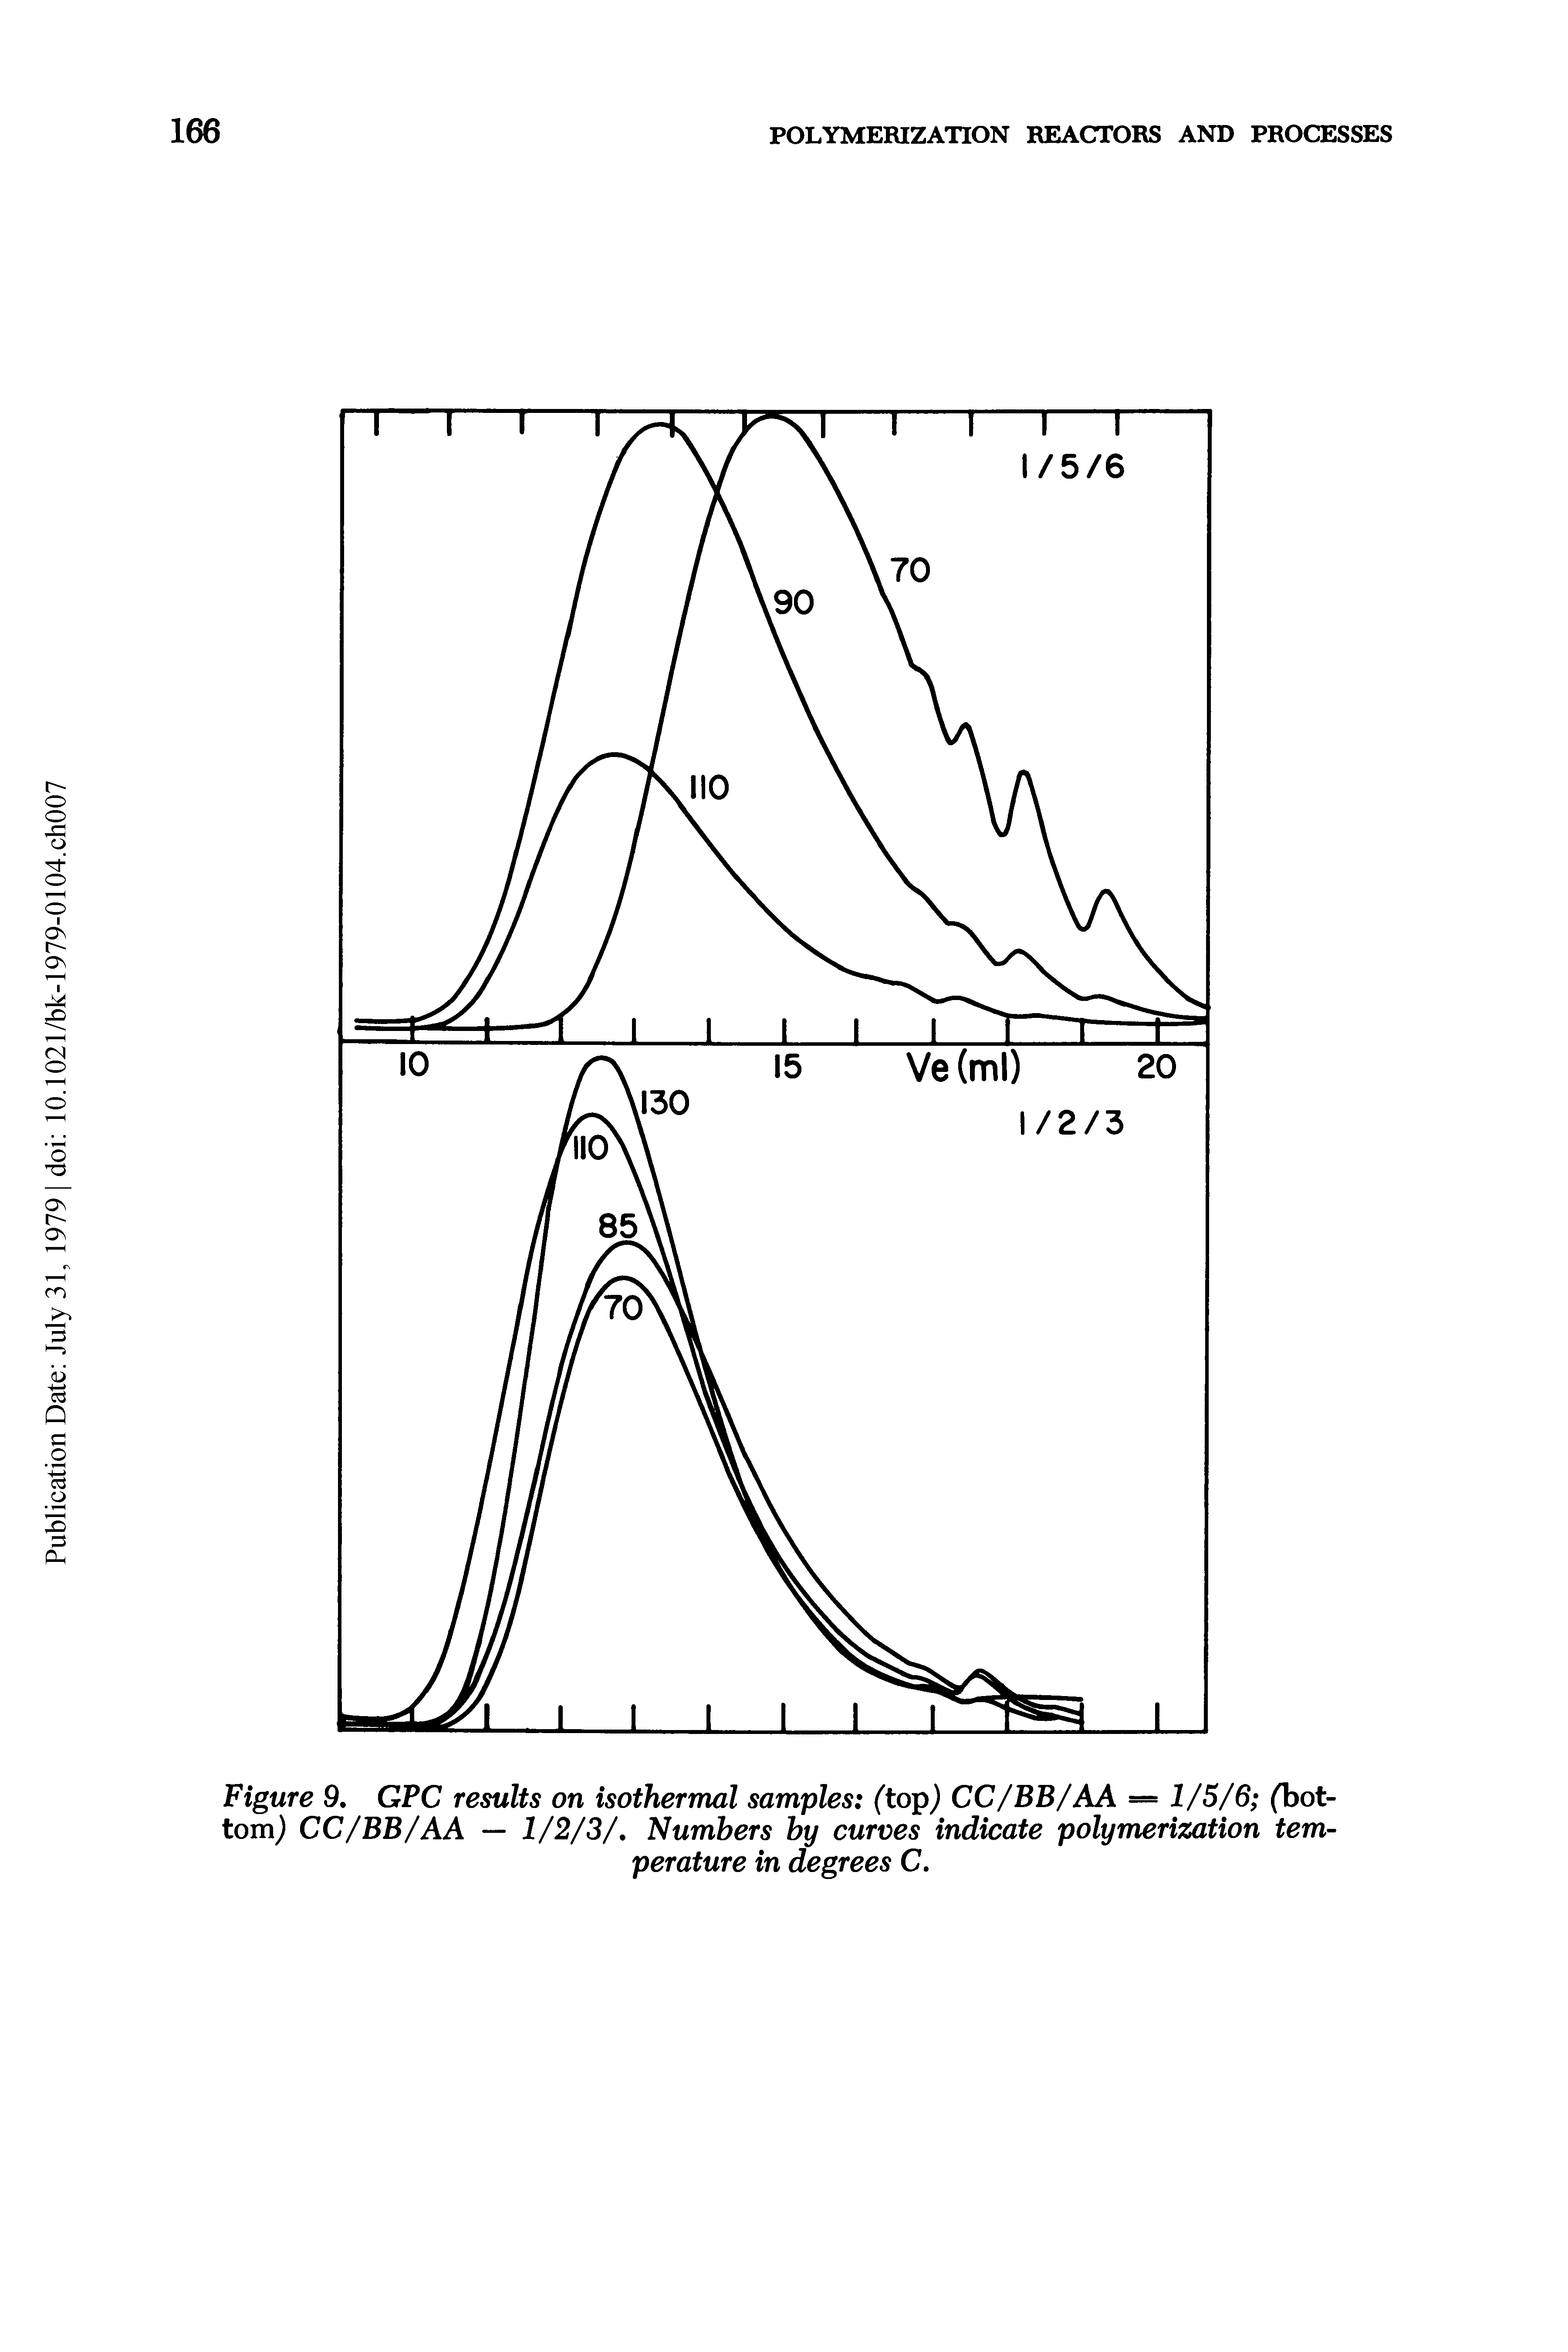 Figure 9. GPC results on isothermal samples (top) CC/BB/AA = 1/5/6 (bottom) CC/BB/AA — 1/2/3/, Numbers by curves indicate polymerization temperature in degrees C.